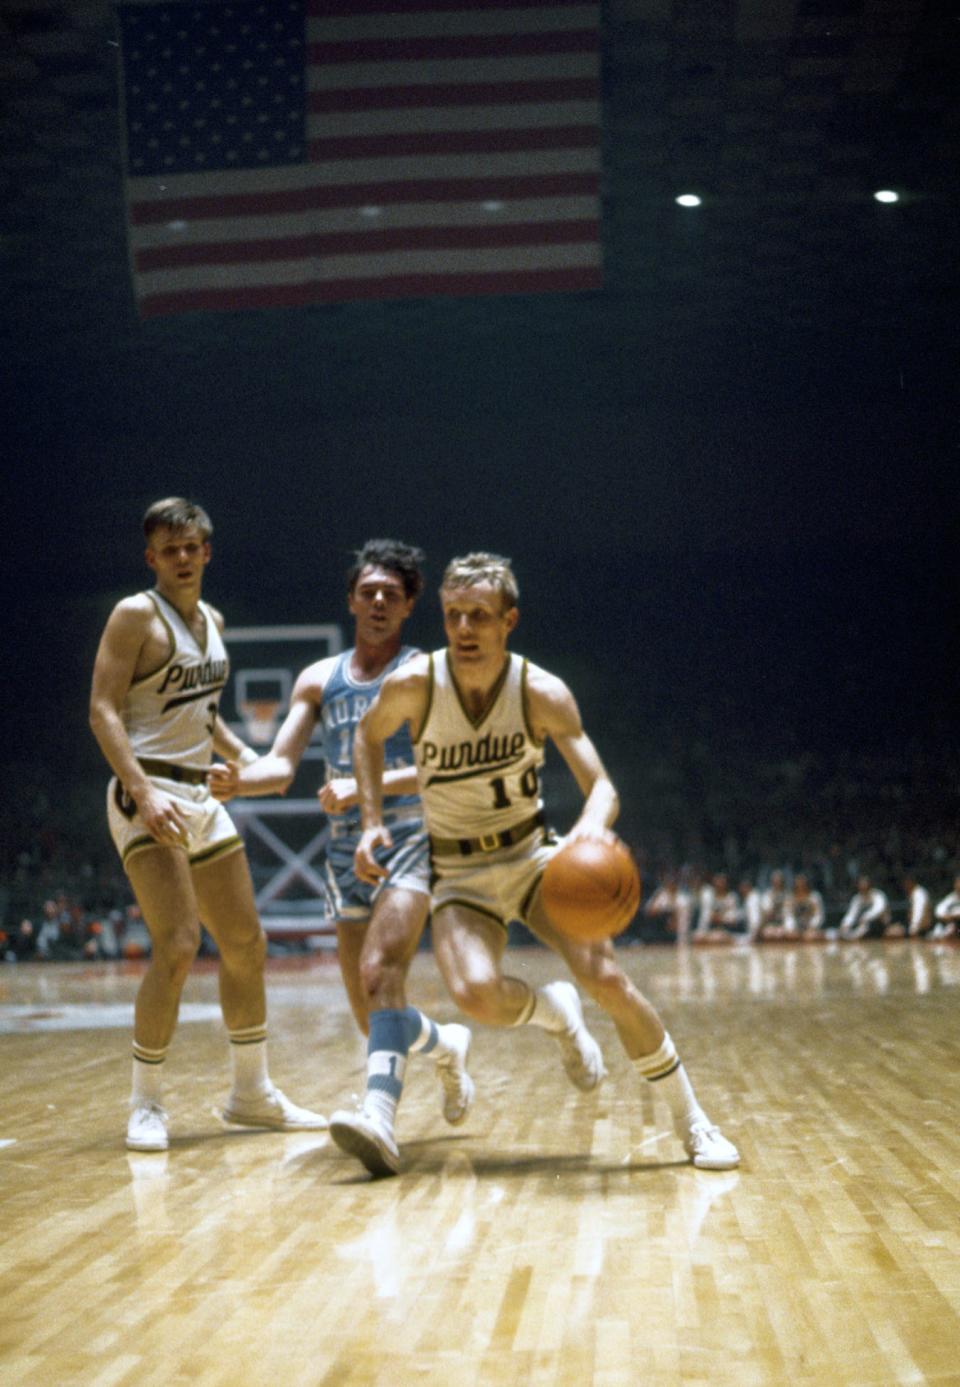 Guard Rick Mount led Purdue to the finals of the 1969 NCAA Tournament, defeating North Carolina in the national semifinals, before losing to UCLA in the title game.